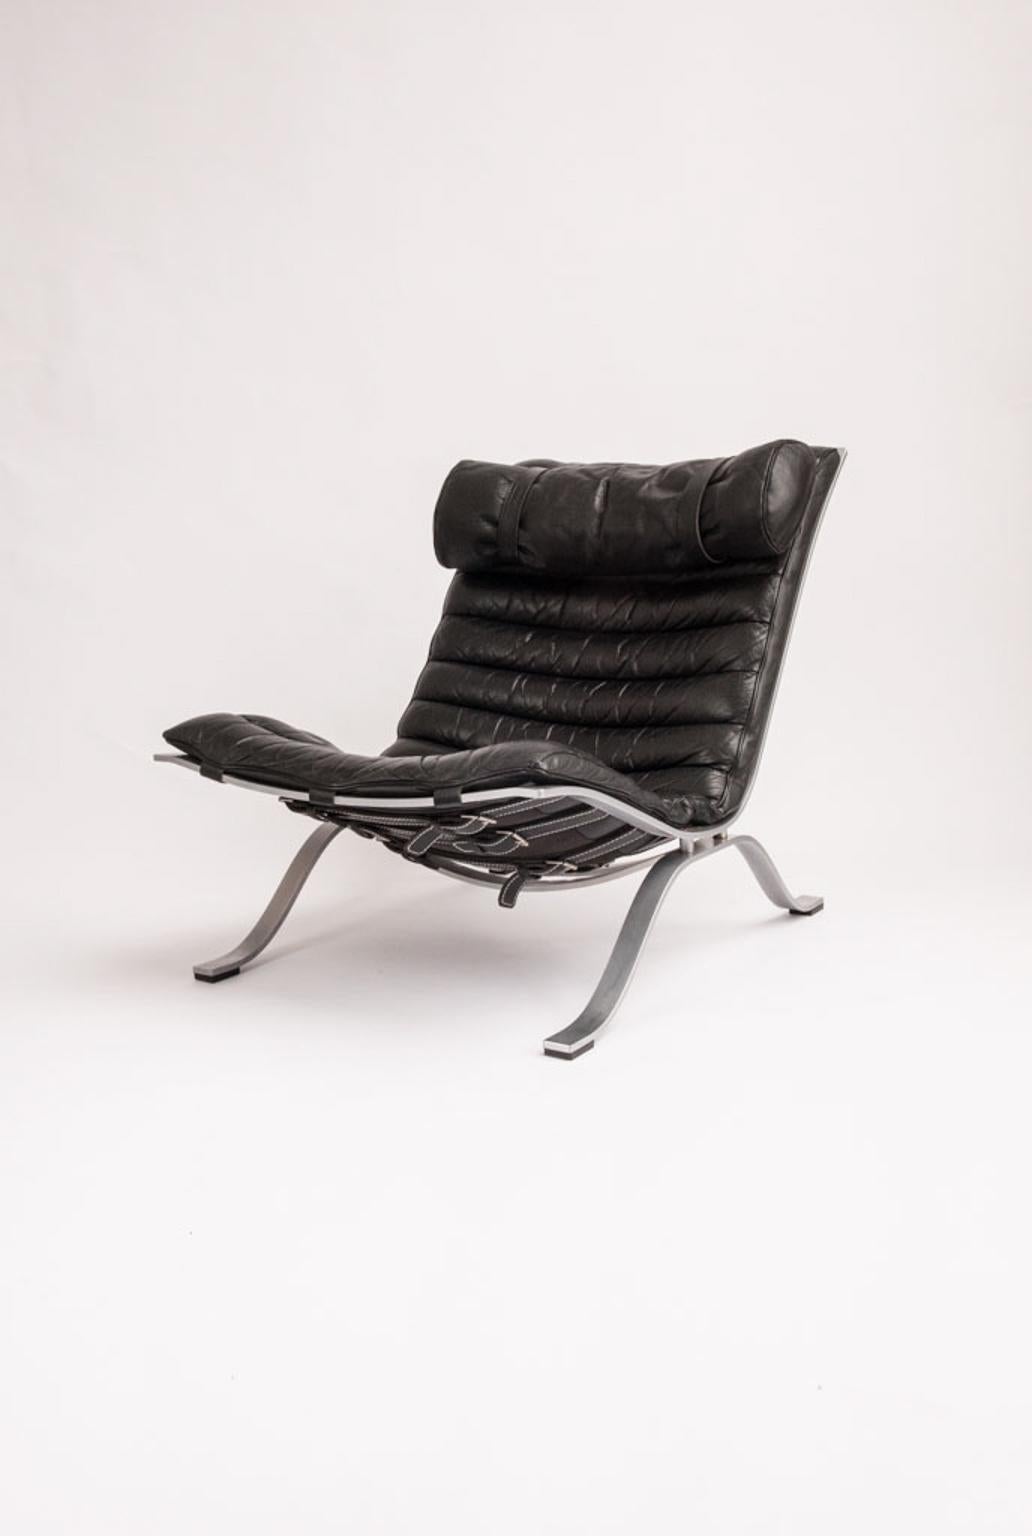 The easy chair Ari is Norells most well-known and appreciated piece, designed in 1966. Loose cushions upholstered in black patinated buffalo leather. Satin chromed flat steel base. Produced by Norell Møbel AB.